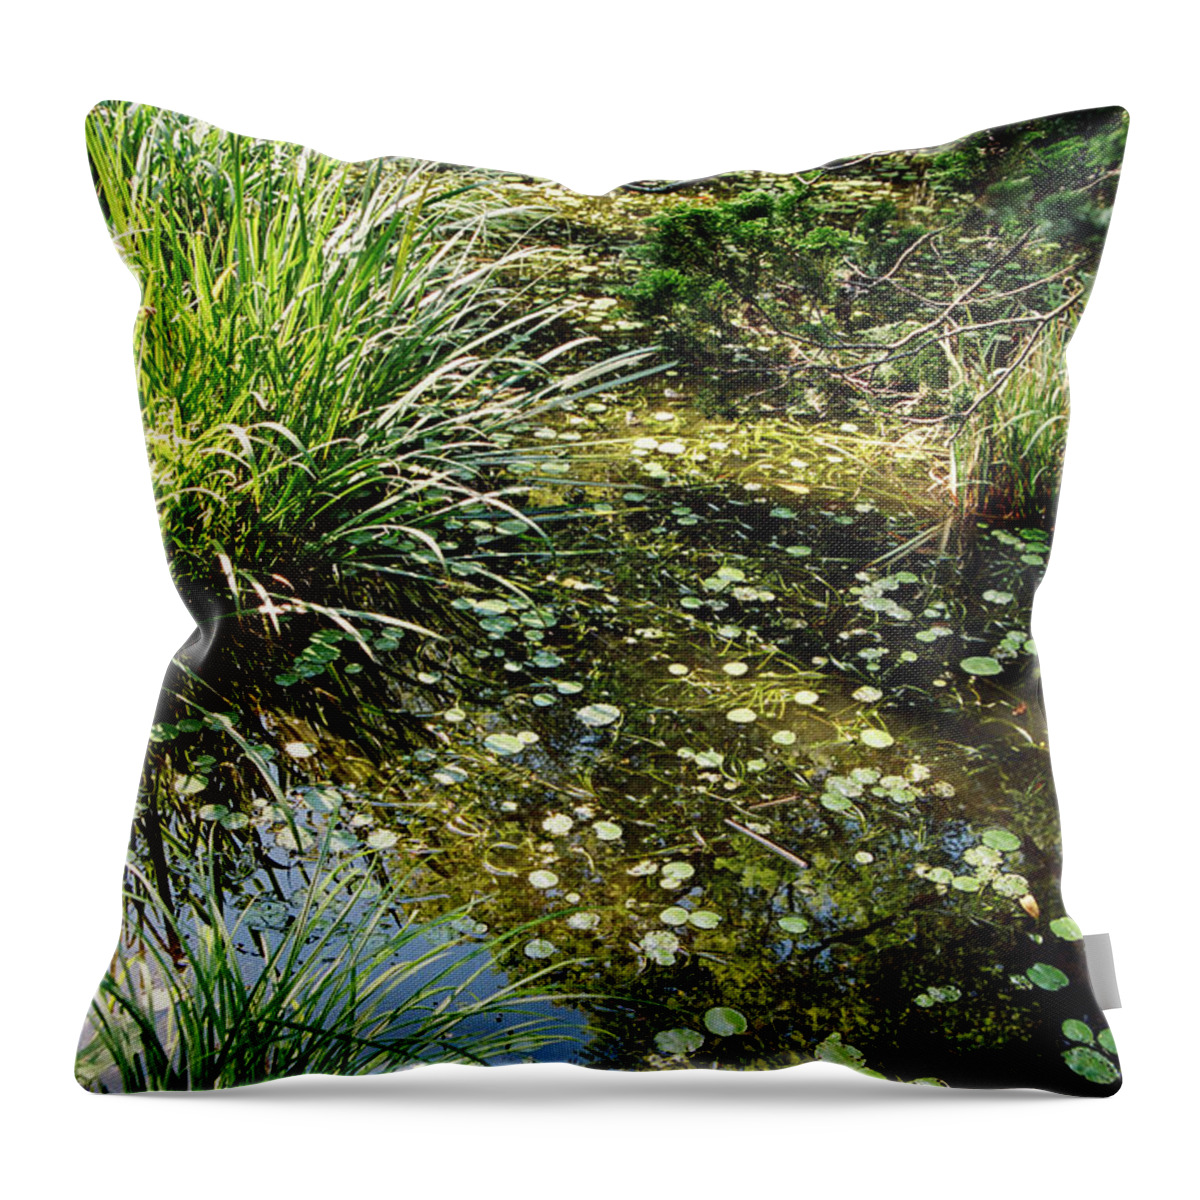 Landscape Throw Pillow featuring the photograph Dnrs1010 by Henry Butz